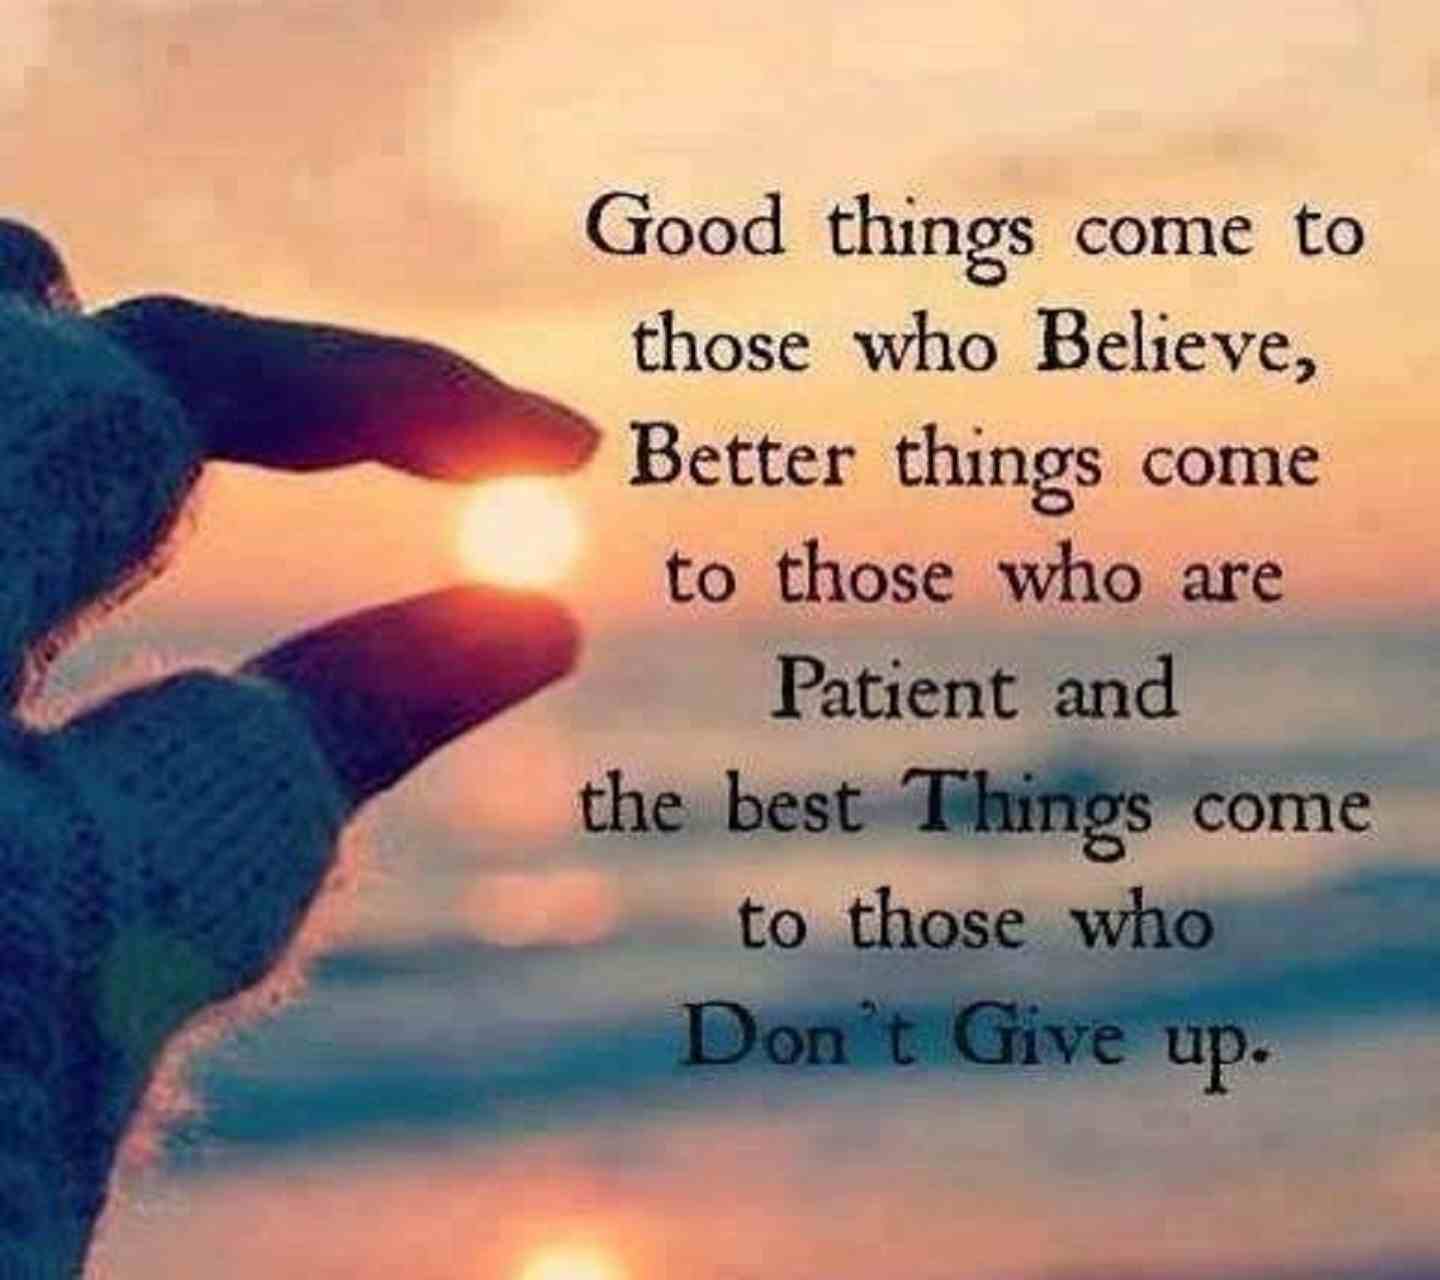 Good things come to those who believe, better things come to those who are patient, and the best things come to those who don't give up